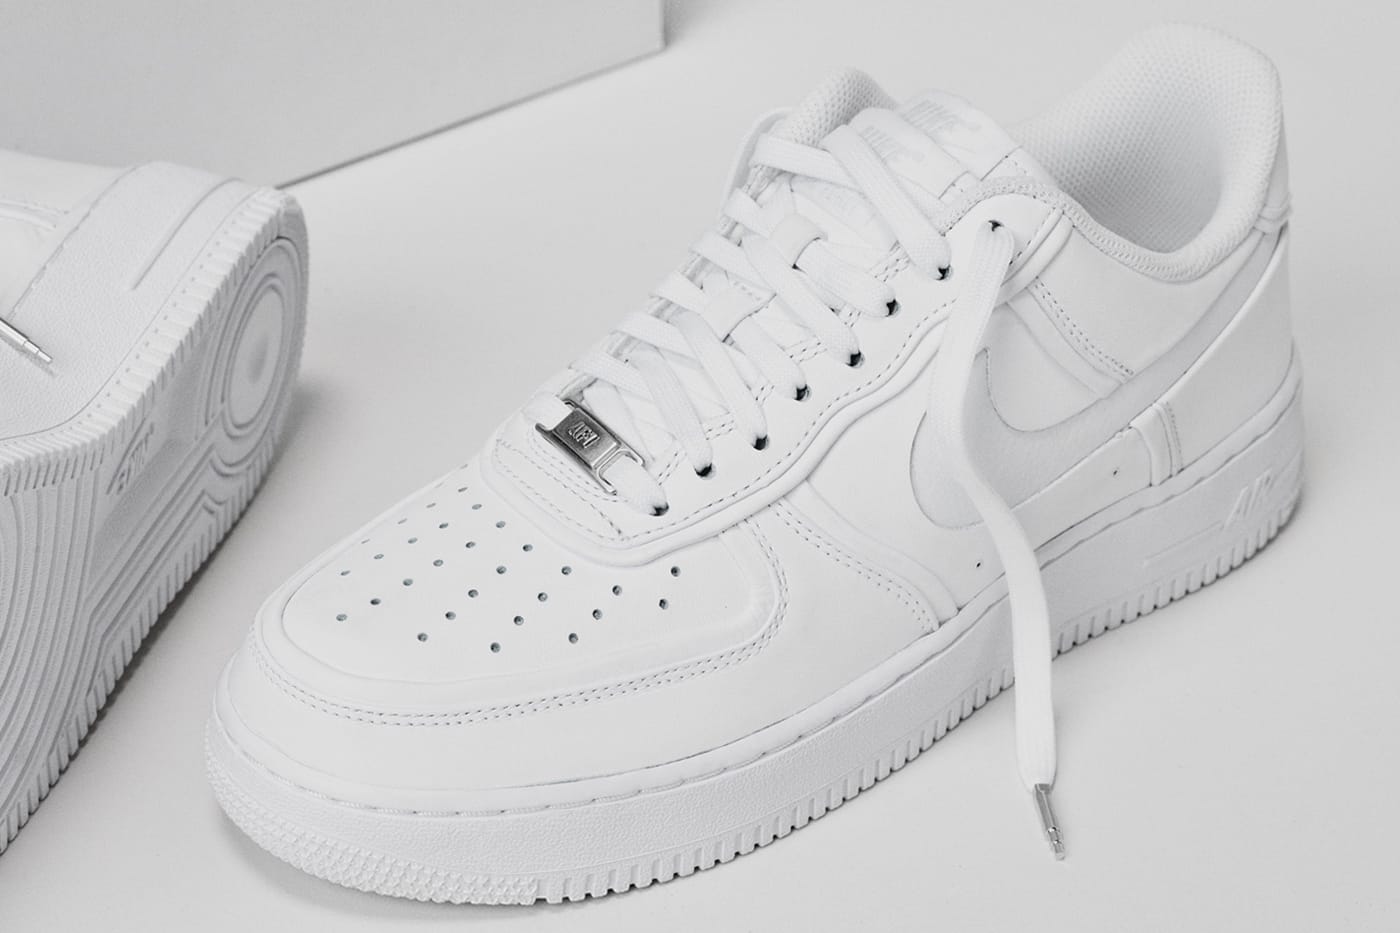 Nike Air Force 1 Features Deals, 57% OFF | www.rupit.com